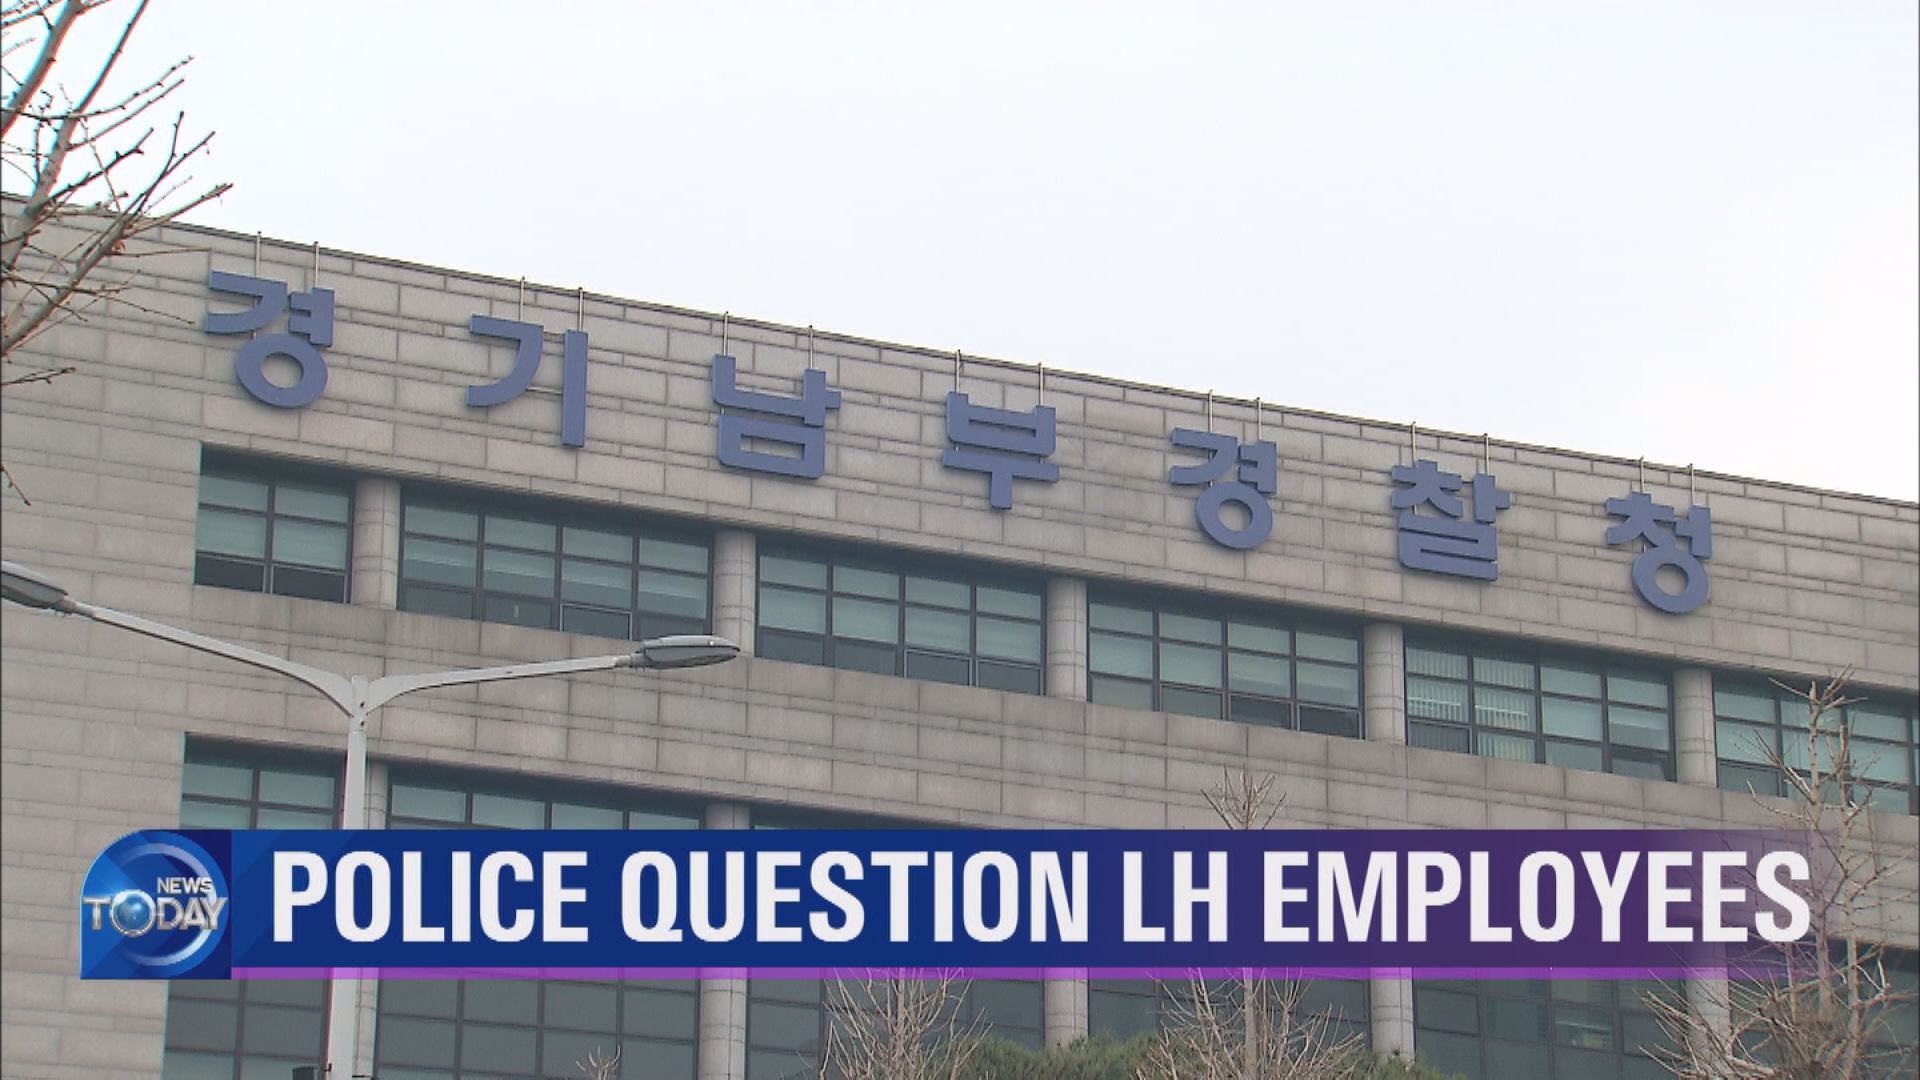 POLICE QUESTION LH EMPLOYEES